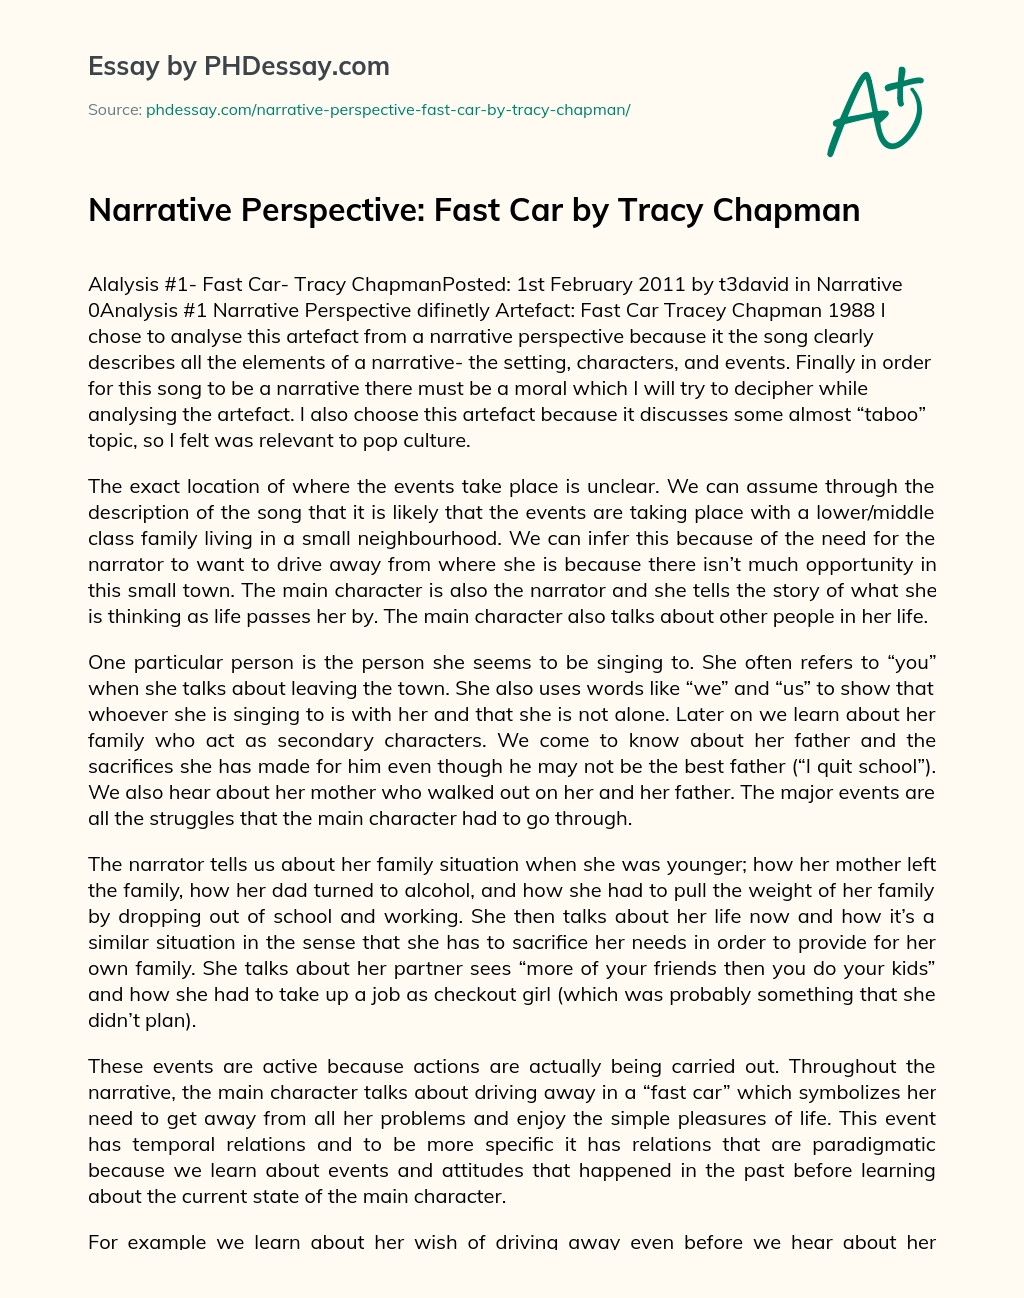 Narrative Perspective: Fast Car by Tracy Chapman essay